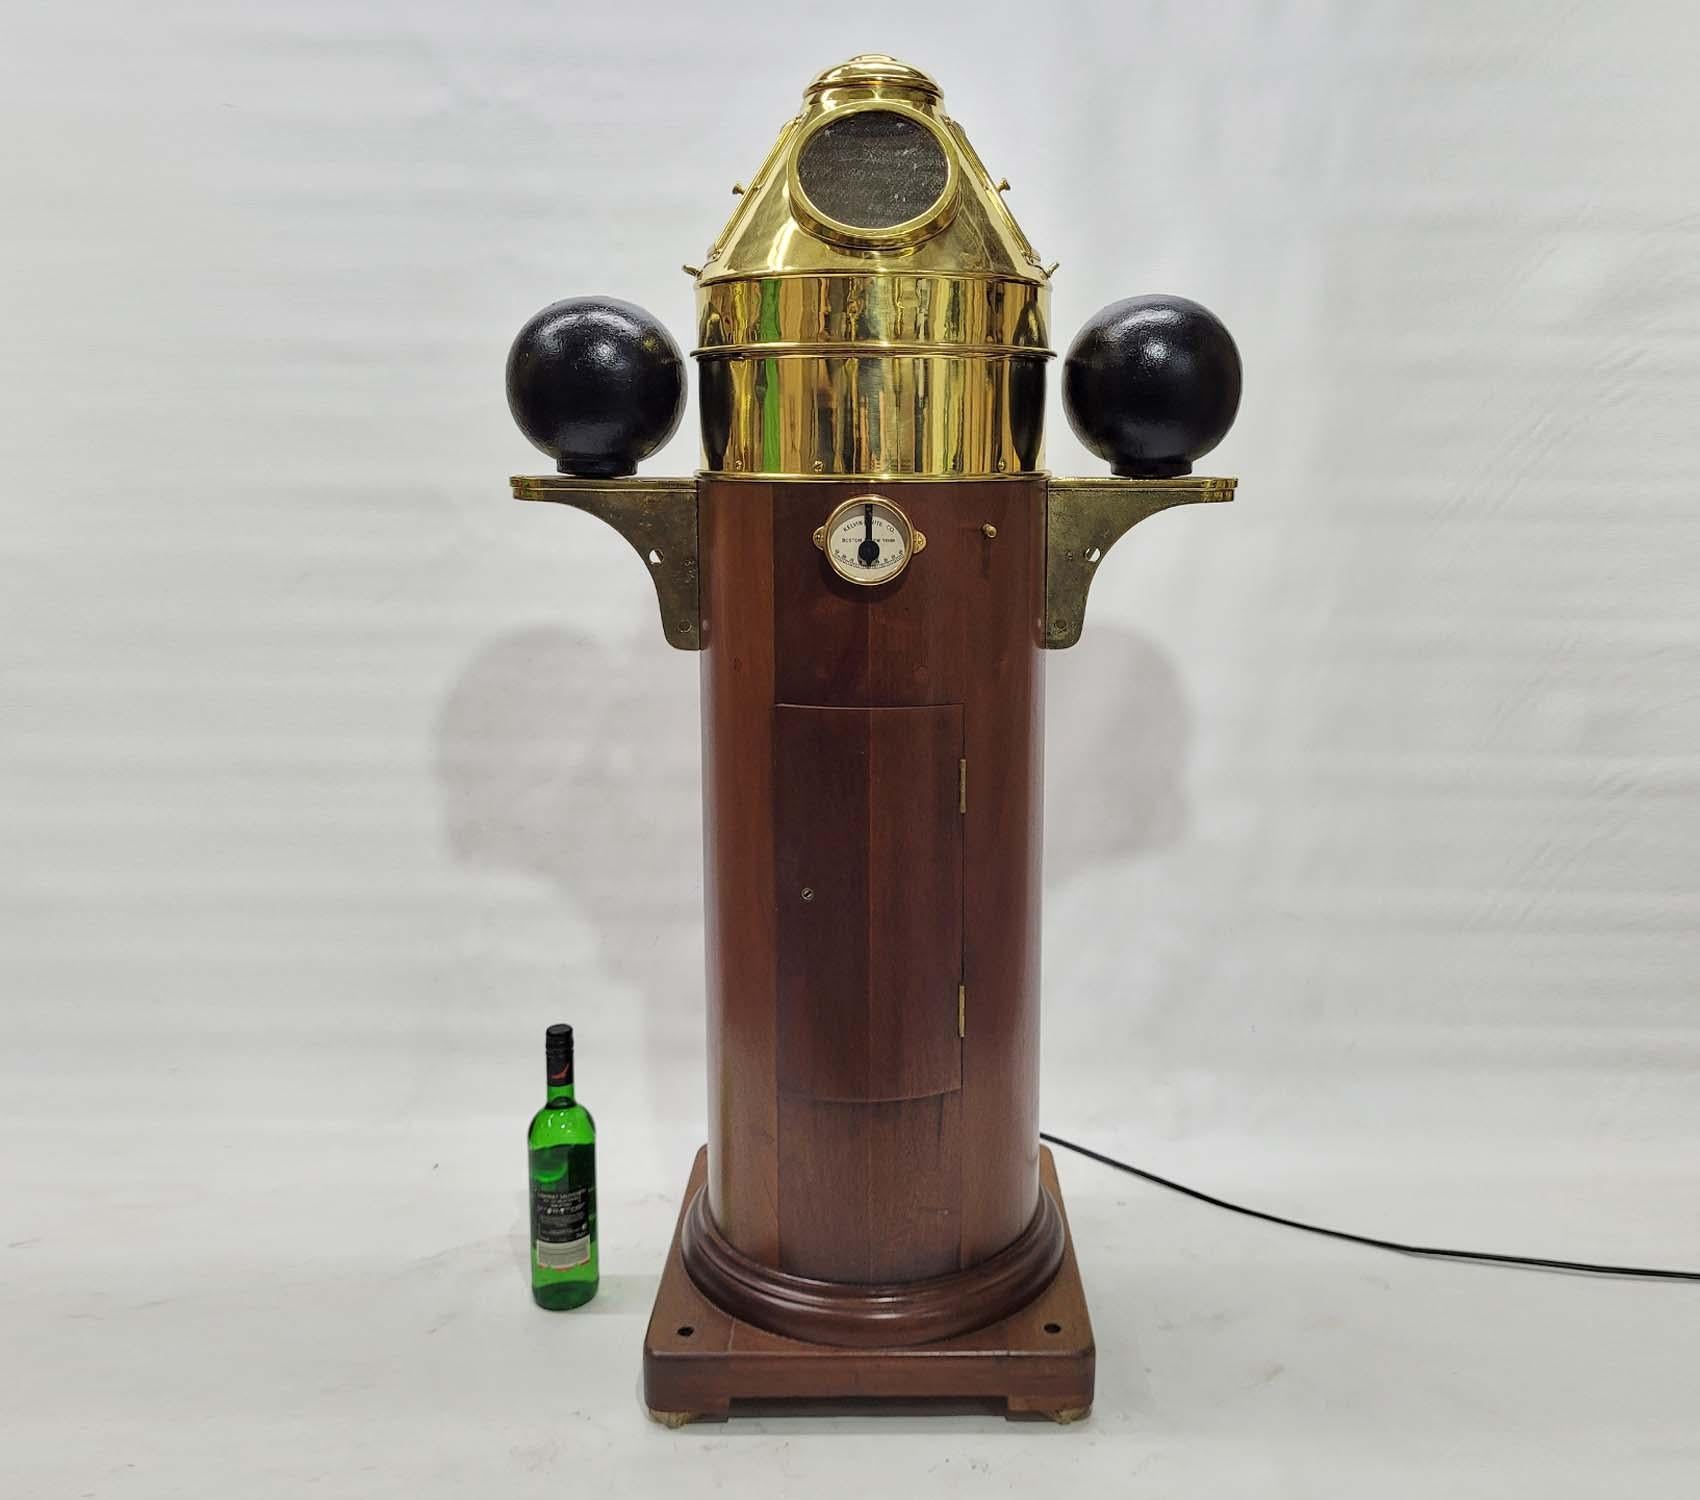 First class yacht binnacle by Kevin Hughes of New York and Boston. Varnished wood base with hinged door. A bronze clinometer is mounted to the base. Iron compensating balls are mounted to brass brackets. The brass wood and band hold a gimballed